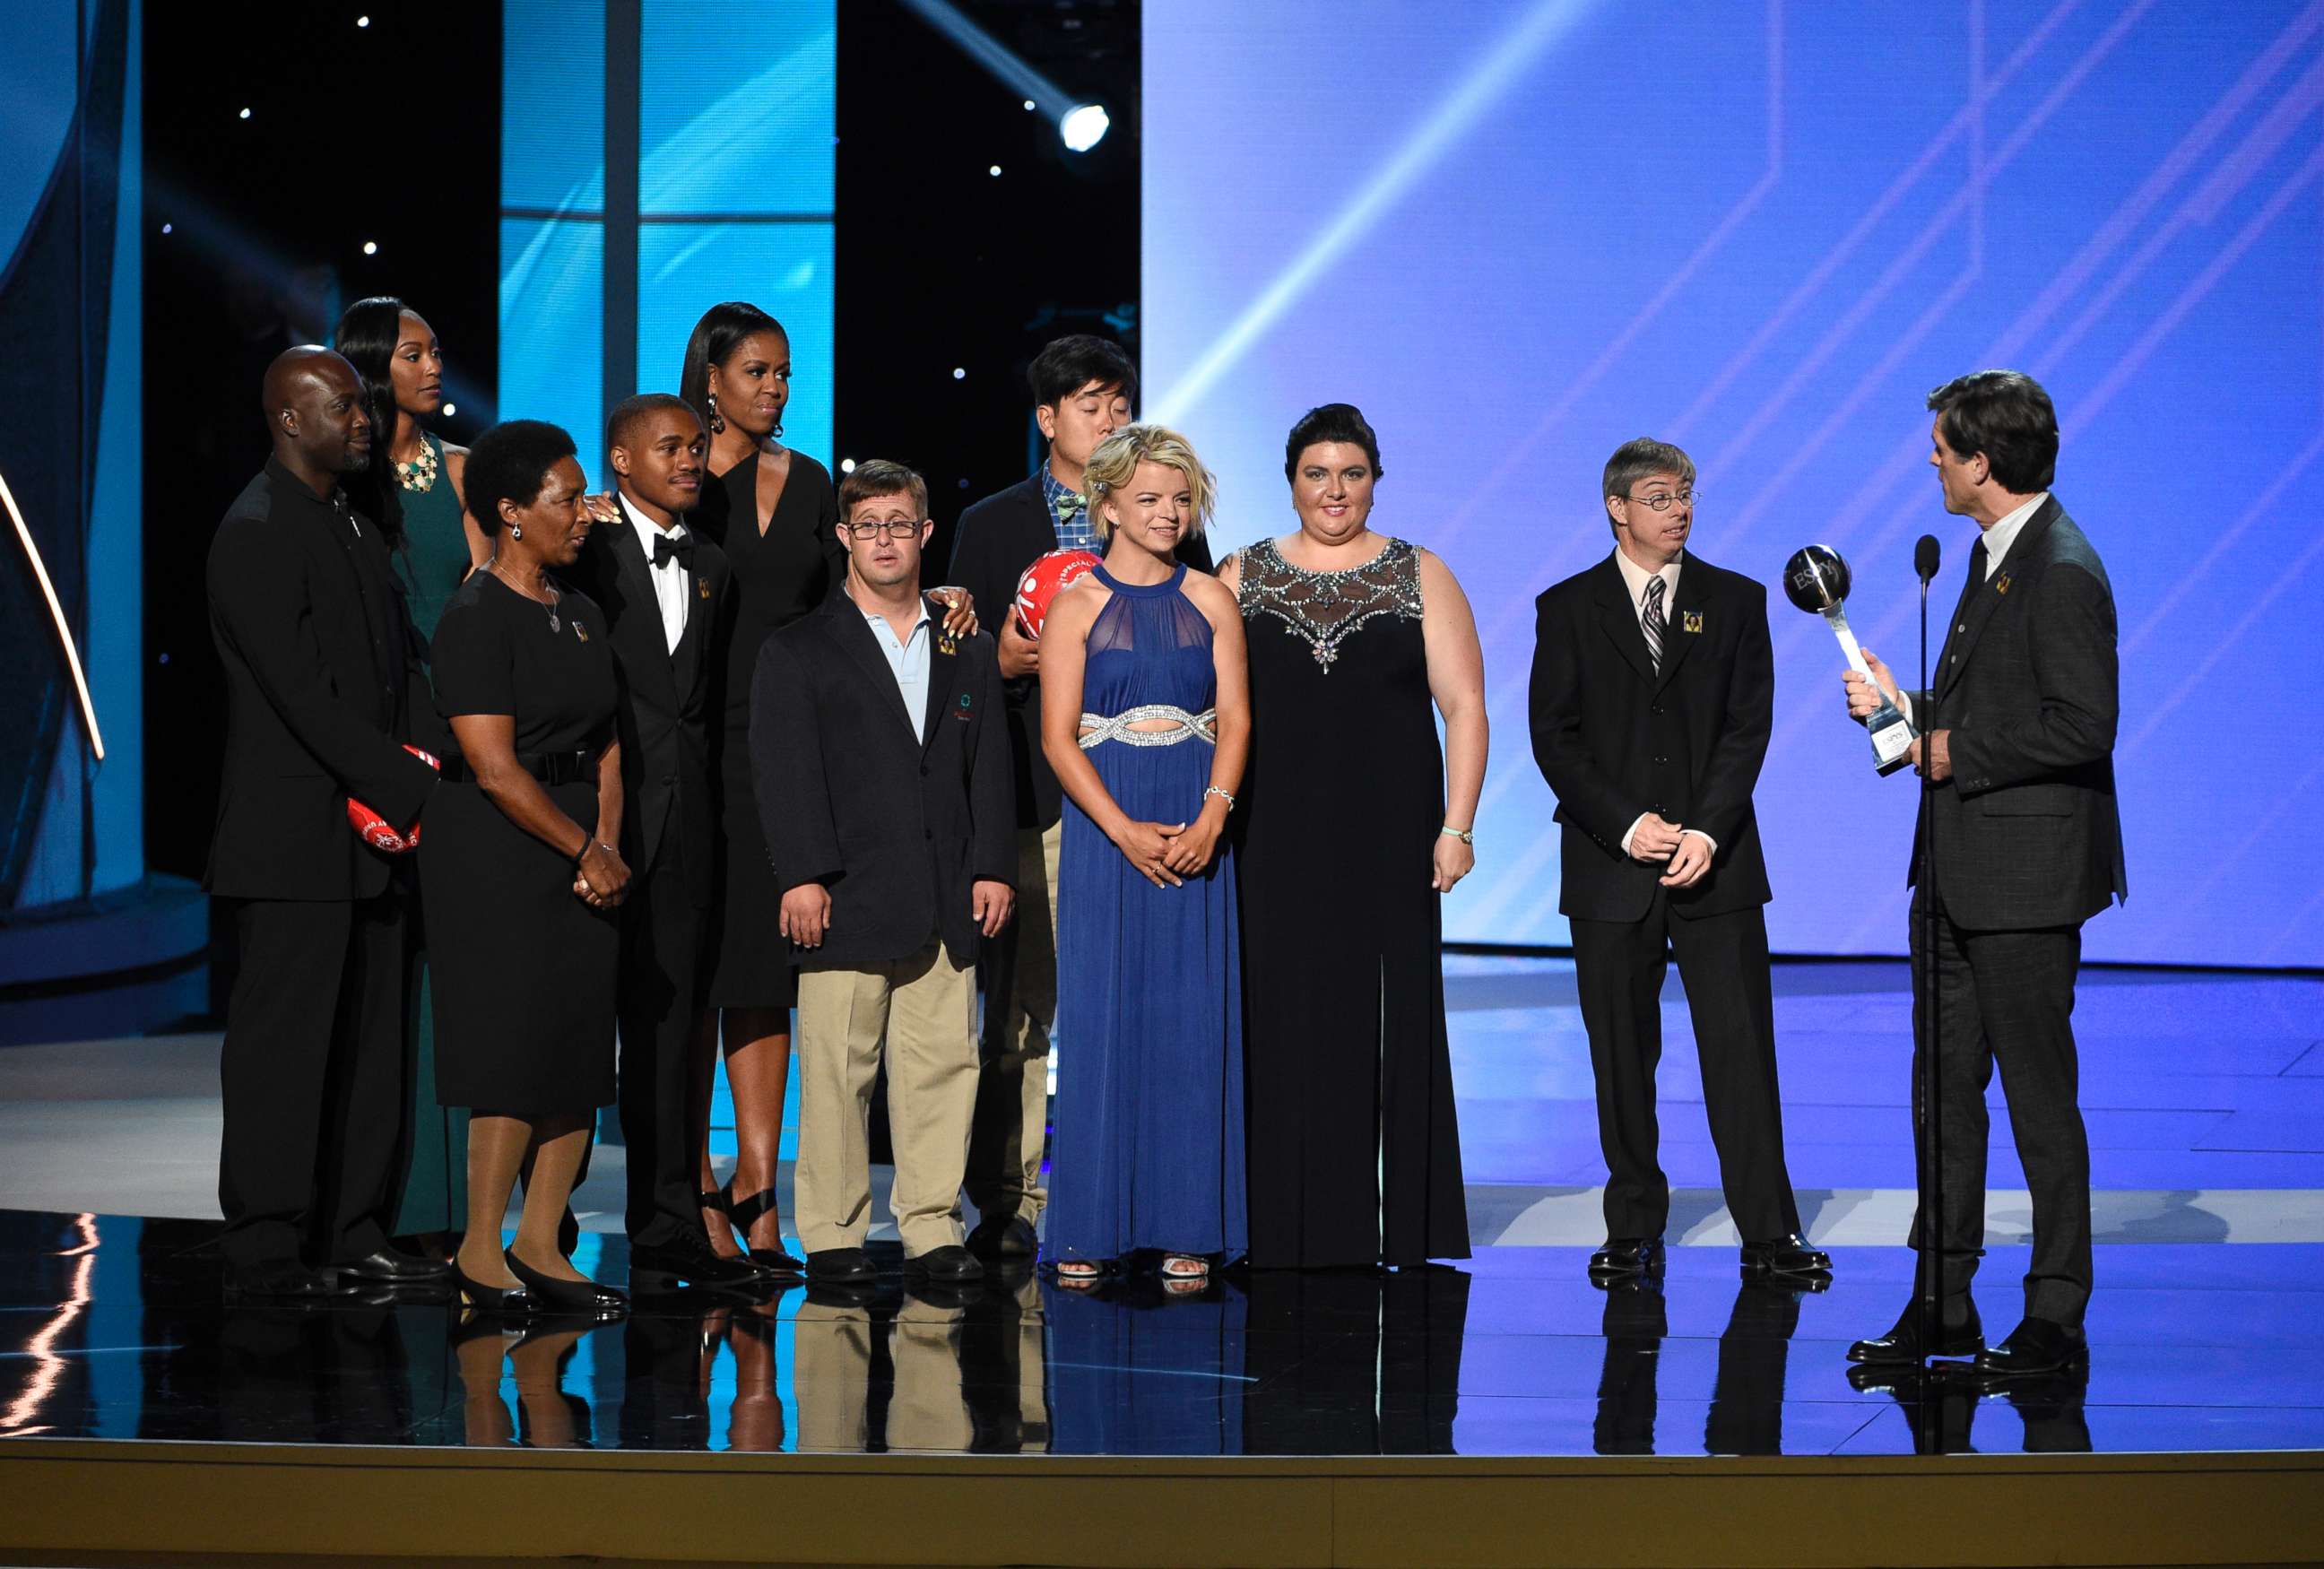 PHOTO: Timothy Shriver addresses former first lady Michelle Obama, fifth from left, and Special Olympic athletes as he accepts the Arthur Ashe Courage Award on behalf of his late mother at the Microsoft Theater, July 12, 2017, in Los Angeles.